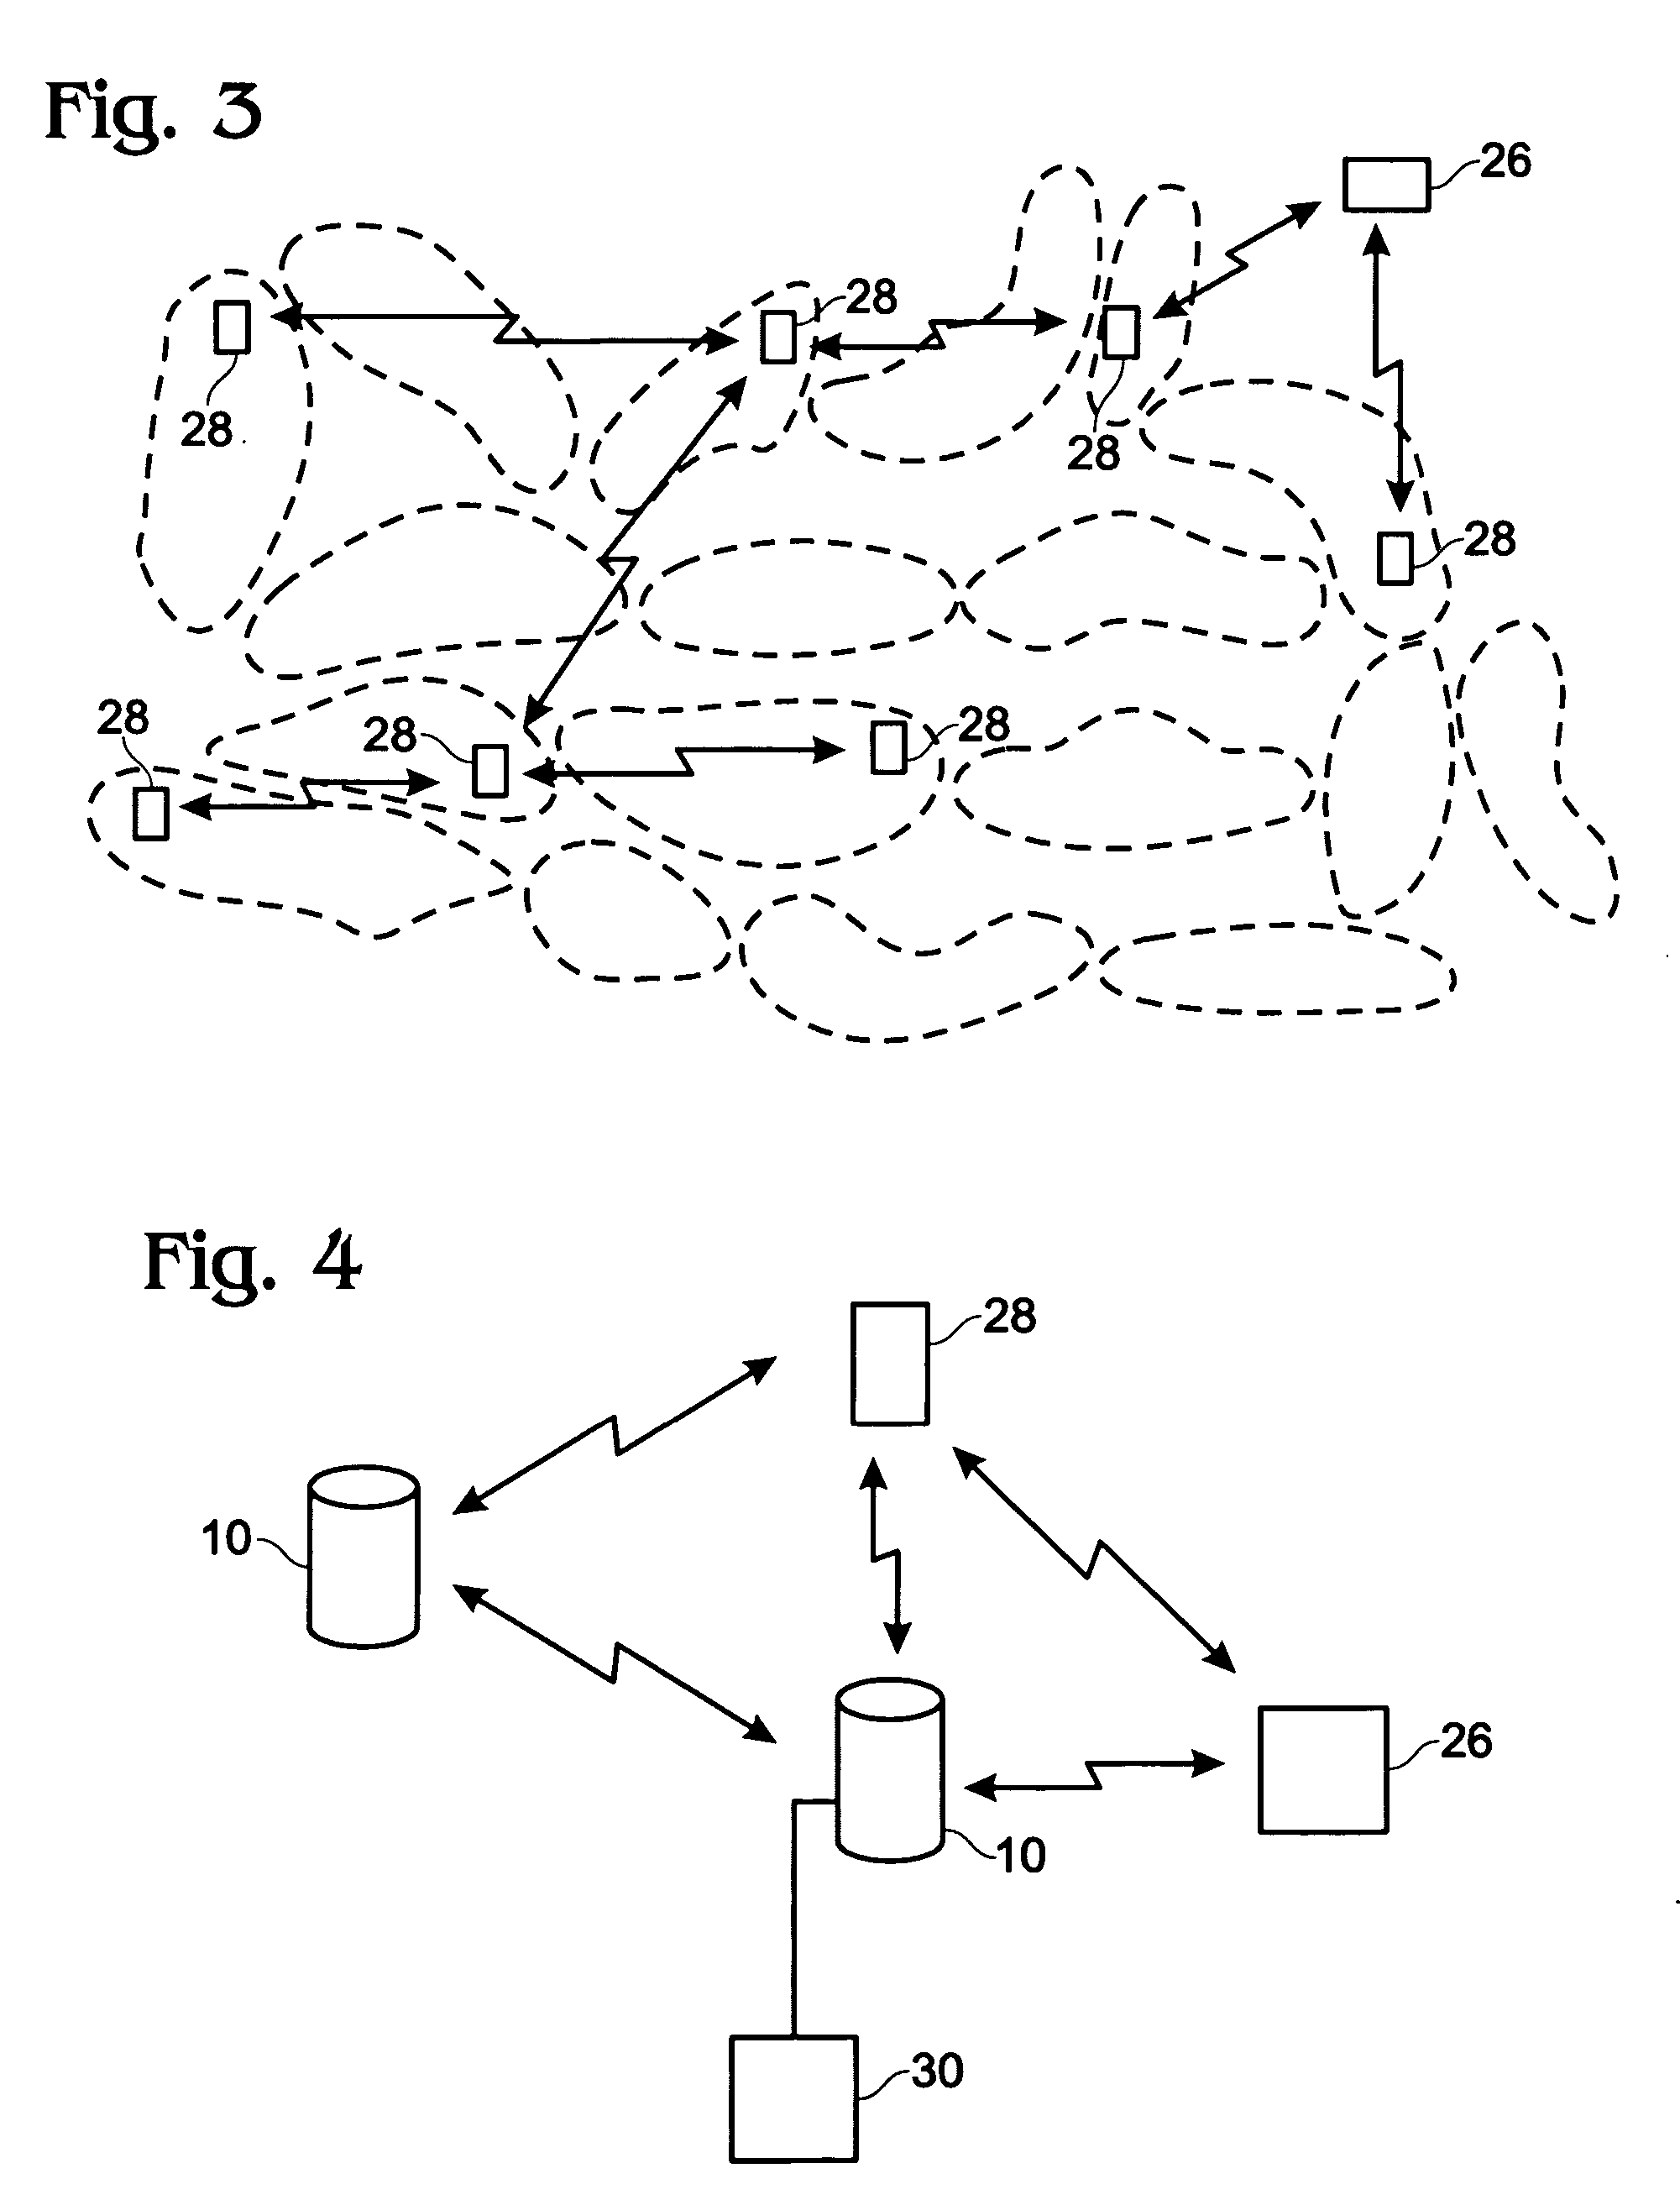 Apparatus and method for wireless real time measurement and control of soil and turf conditions